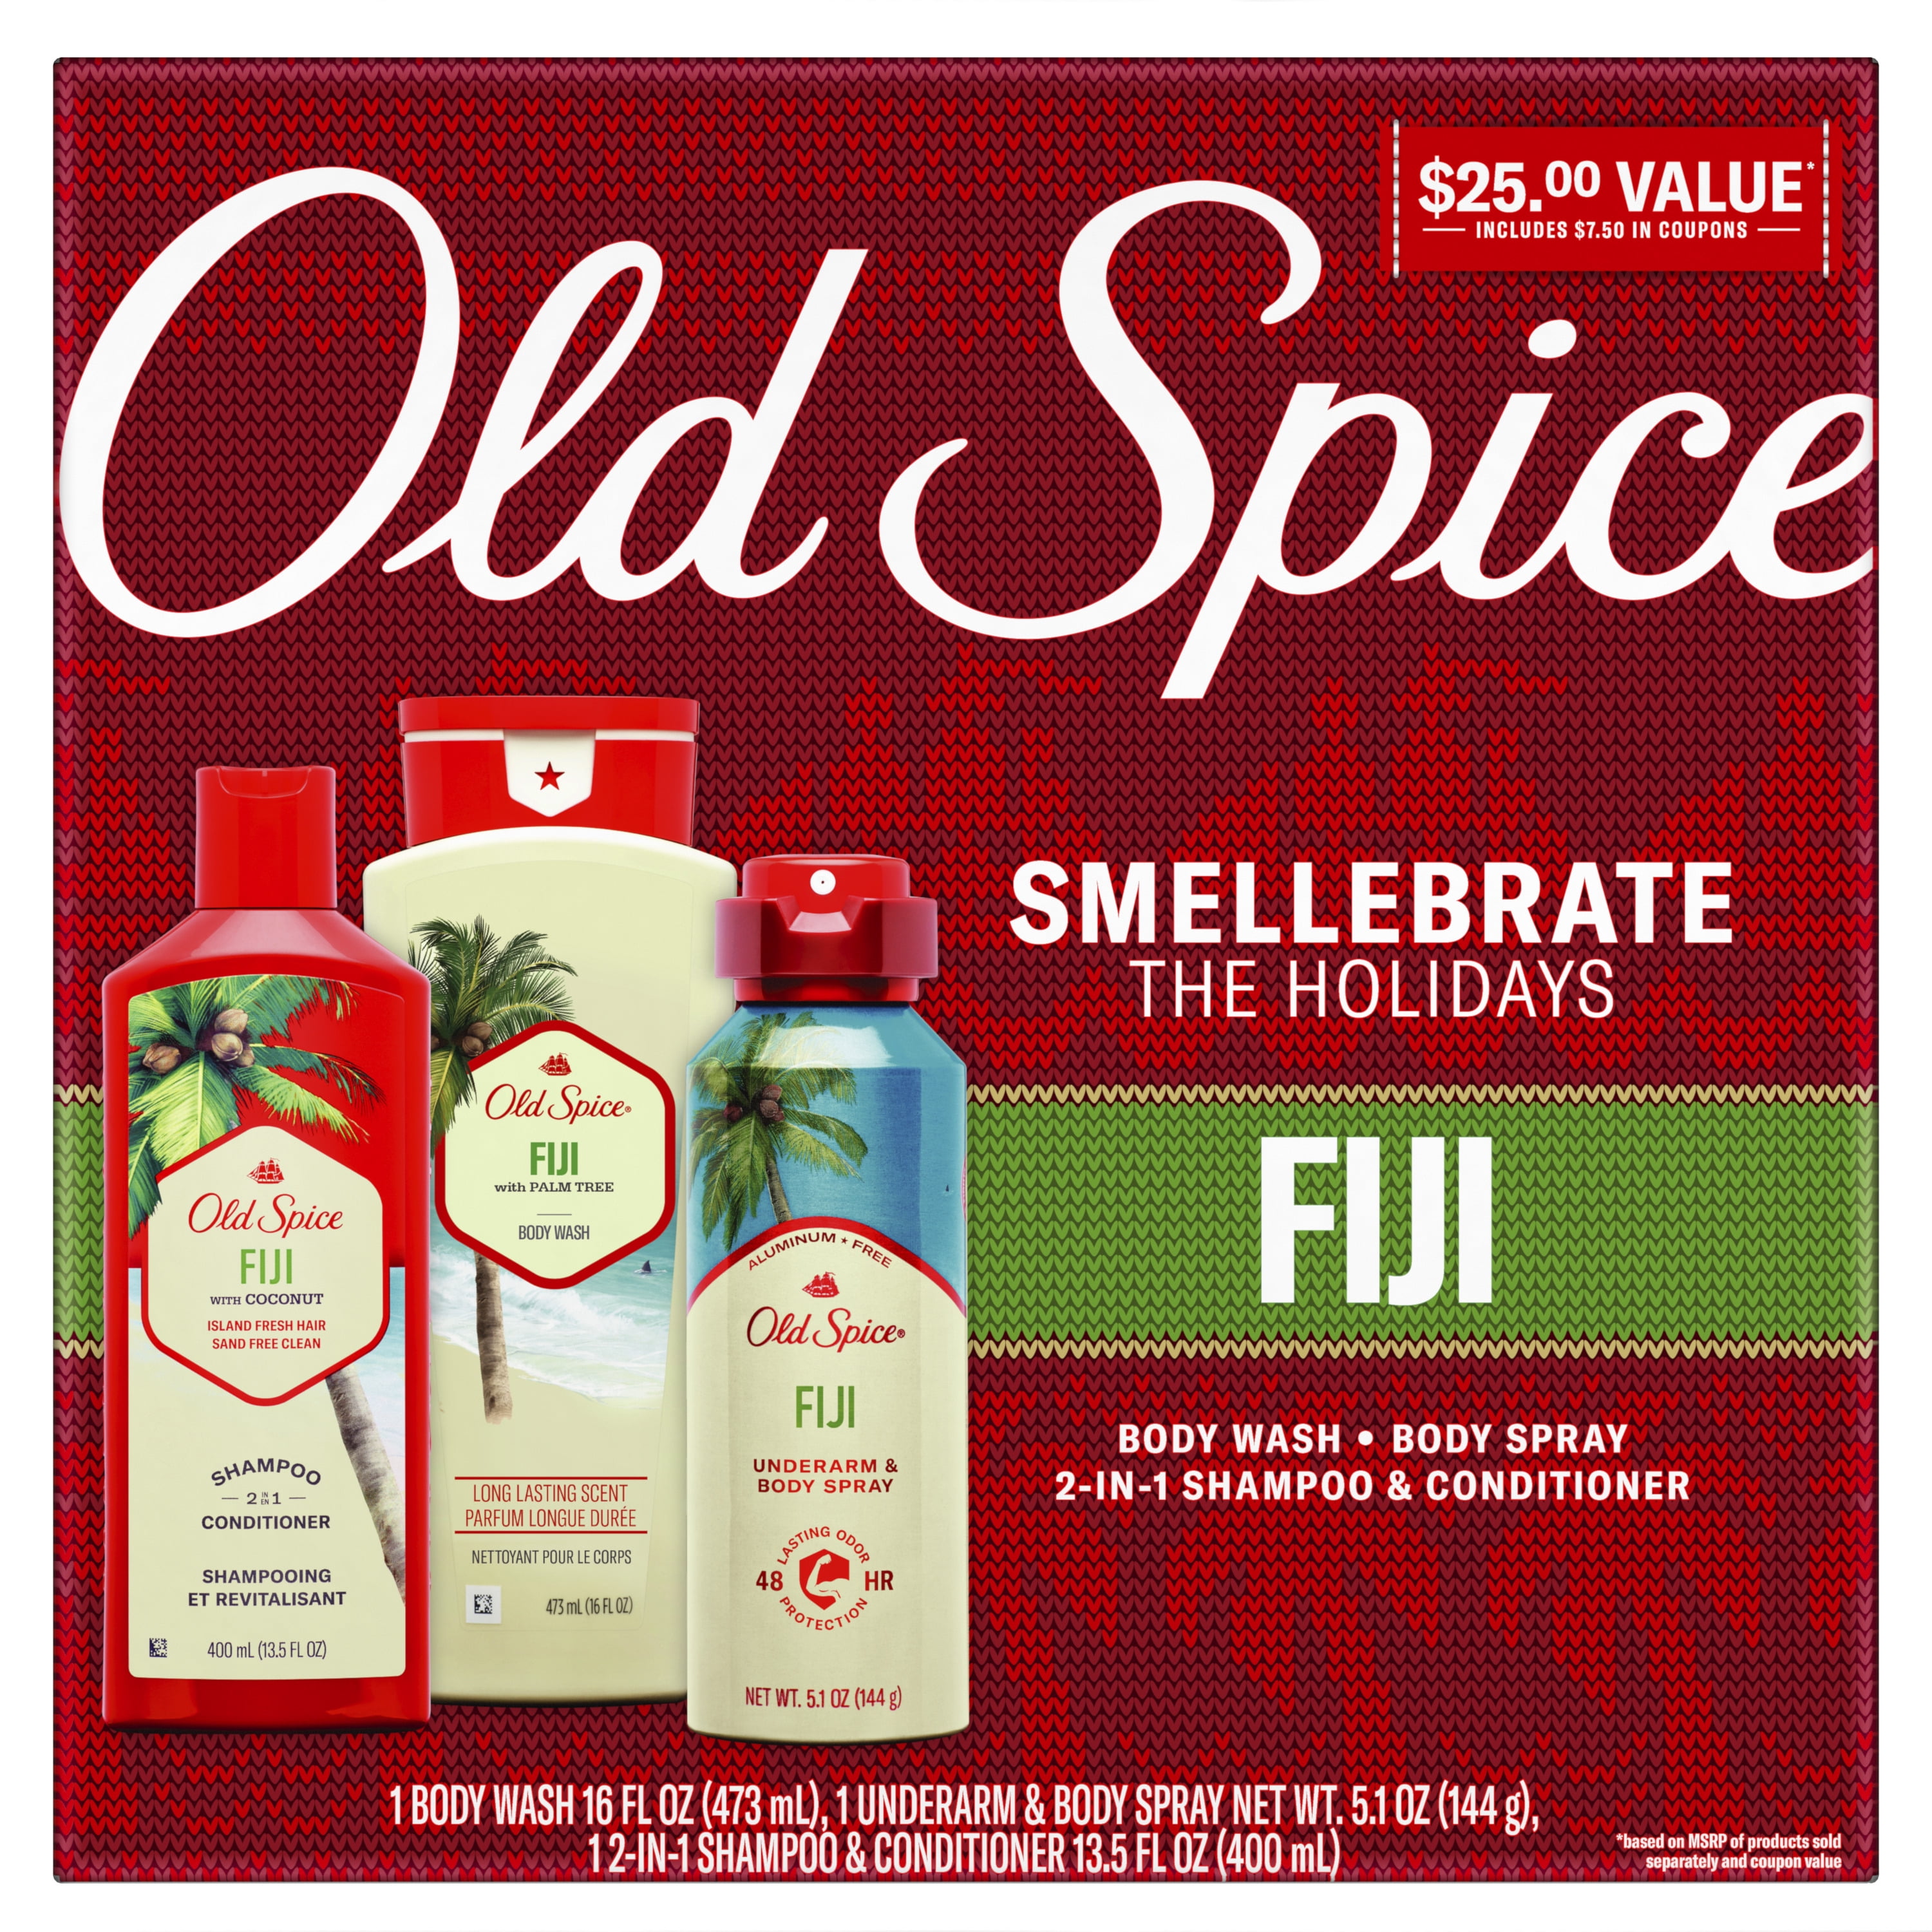 ($25 Value) Old Spice Fiji Holiday Pack includes Bodywash, Bodyspray, and 2-in-1 Shampoo & Conditioner